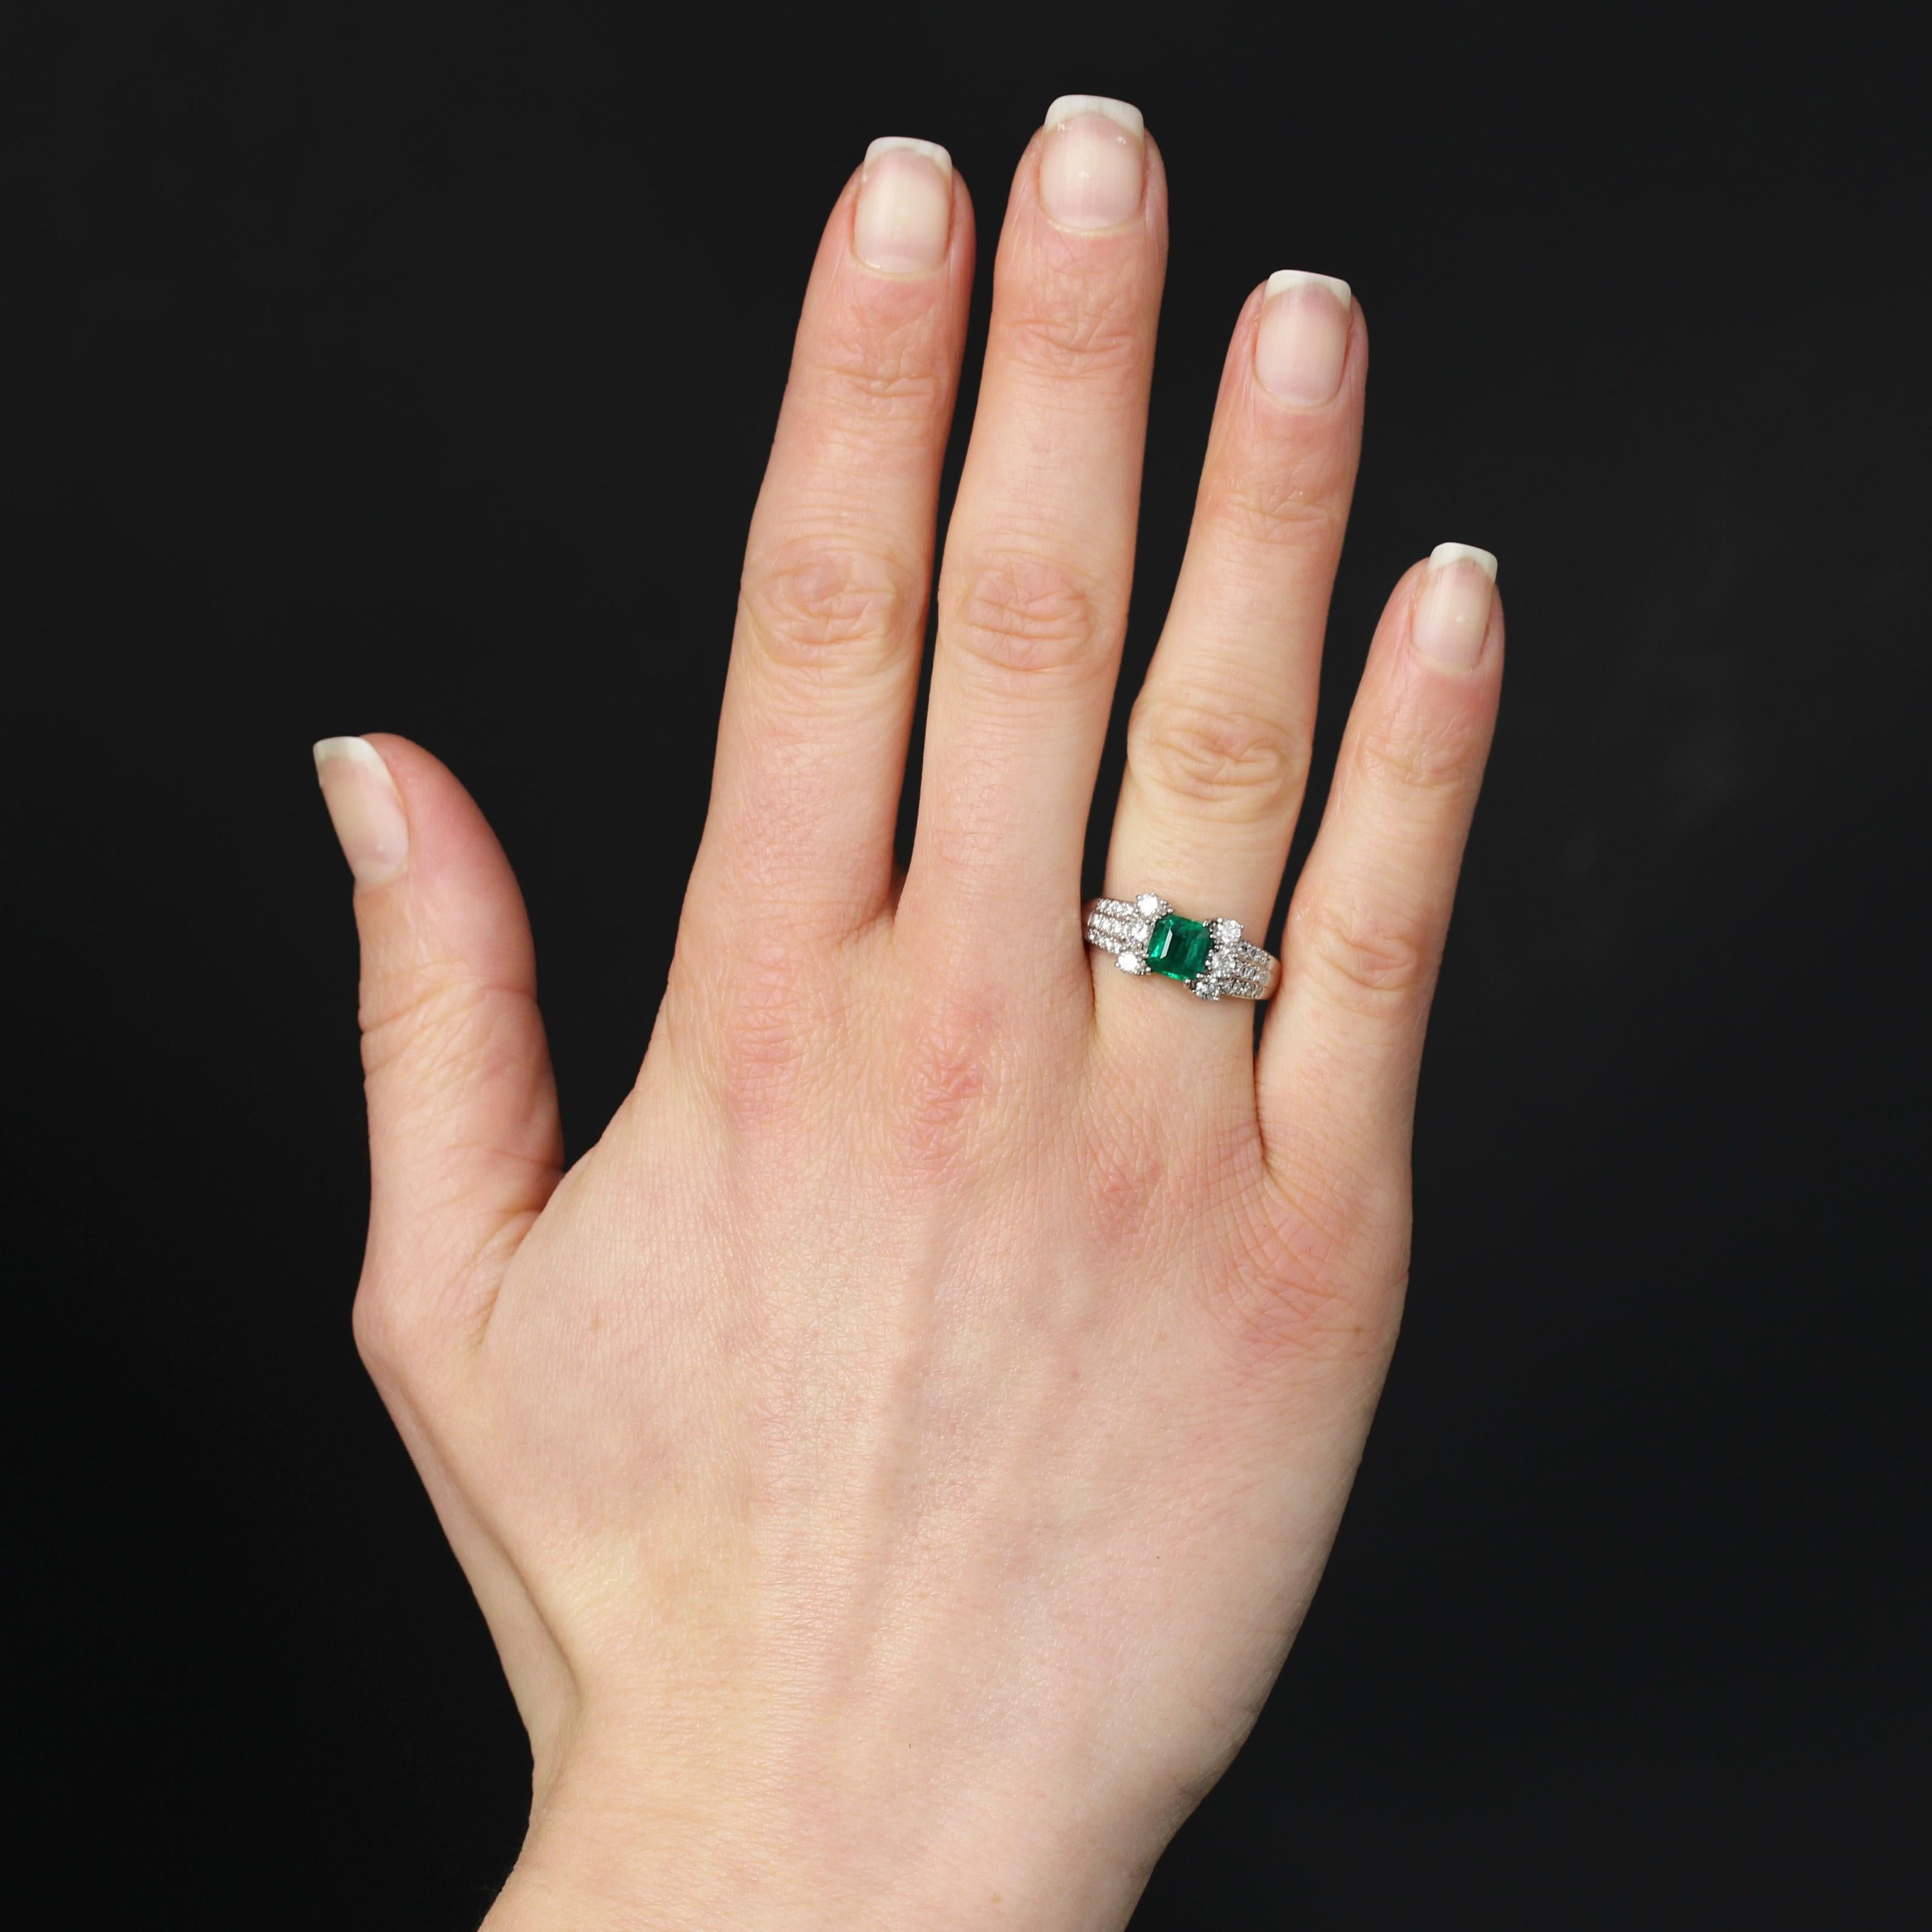 Ring in platinum, dog's head hallmark.
This sublime emerald ring is set with 8 claws of a degree-cut Colombian emerald and 2x 3 modern brilliant-cut diamonds on either side. The start of the ring is gadrooned and set on each side with 11 modern